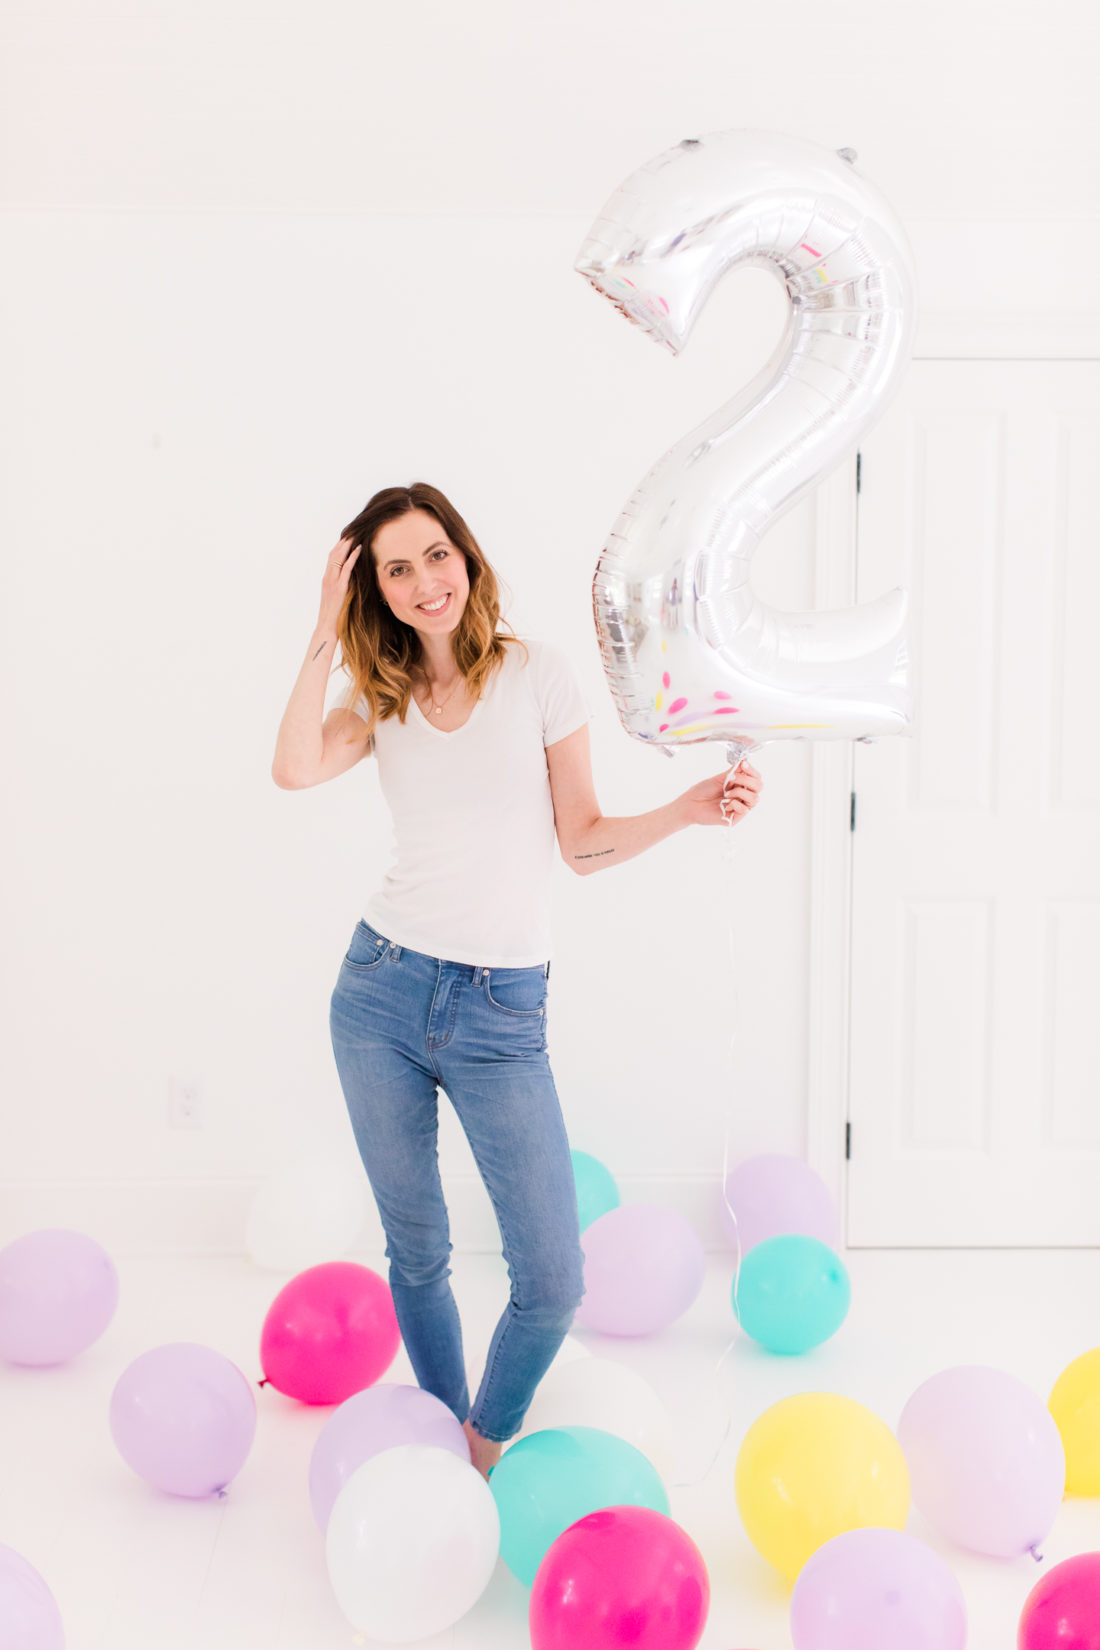 Eva Amurri Martino stands in the Happily Eva After studio filled with balloons to celebrate the second anniversary of the blog